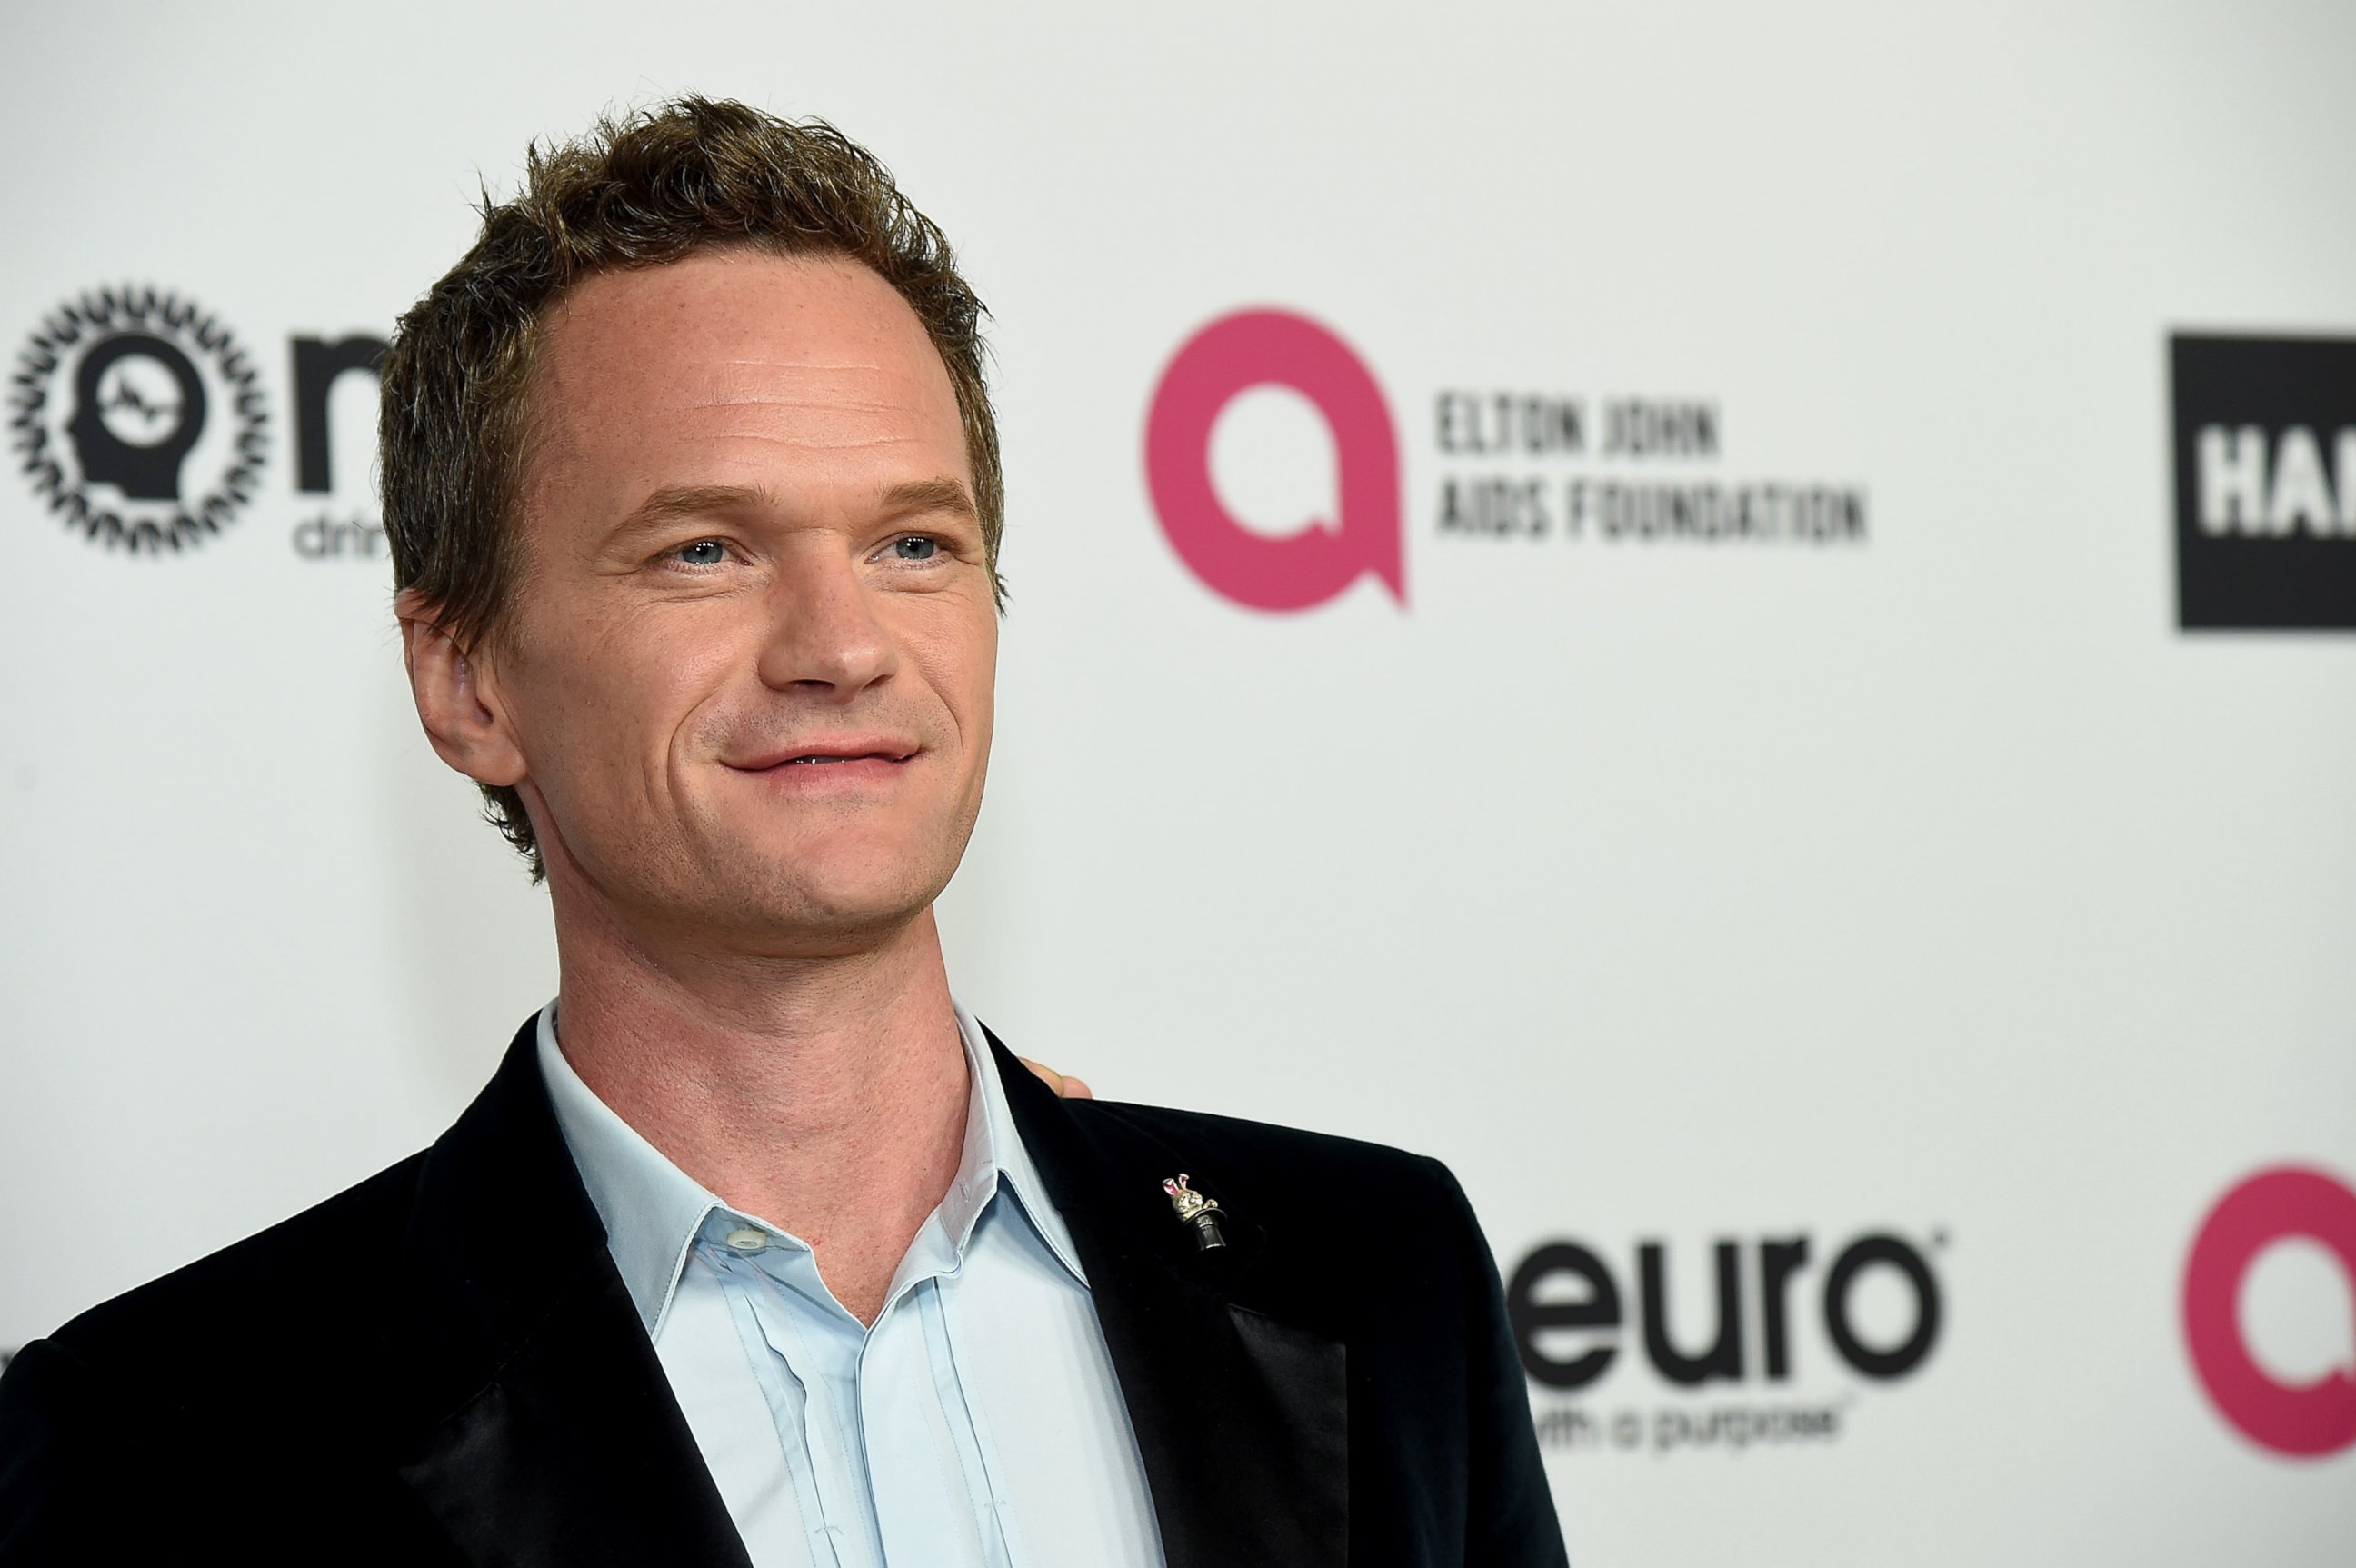 PHOTO: Neil Patrick Harris celebrates Elton John's 70th Birthday and 50-Year Songwriting Partnership with Bernie Taupin benefiting the Elton John AIDS Foundation and the UCLA Hammer Museum at RED Studios Hollywood on March 25, 2017 in Los Angeles.